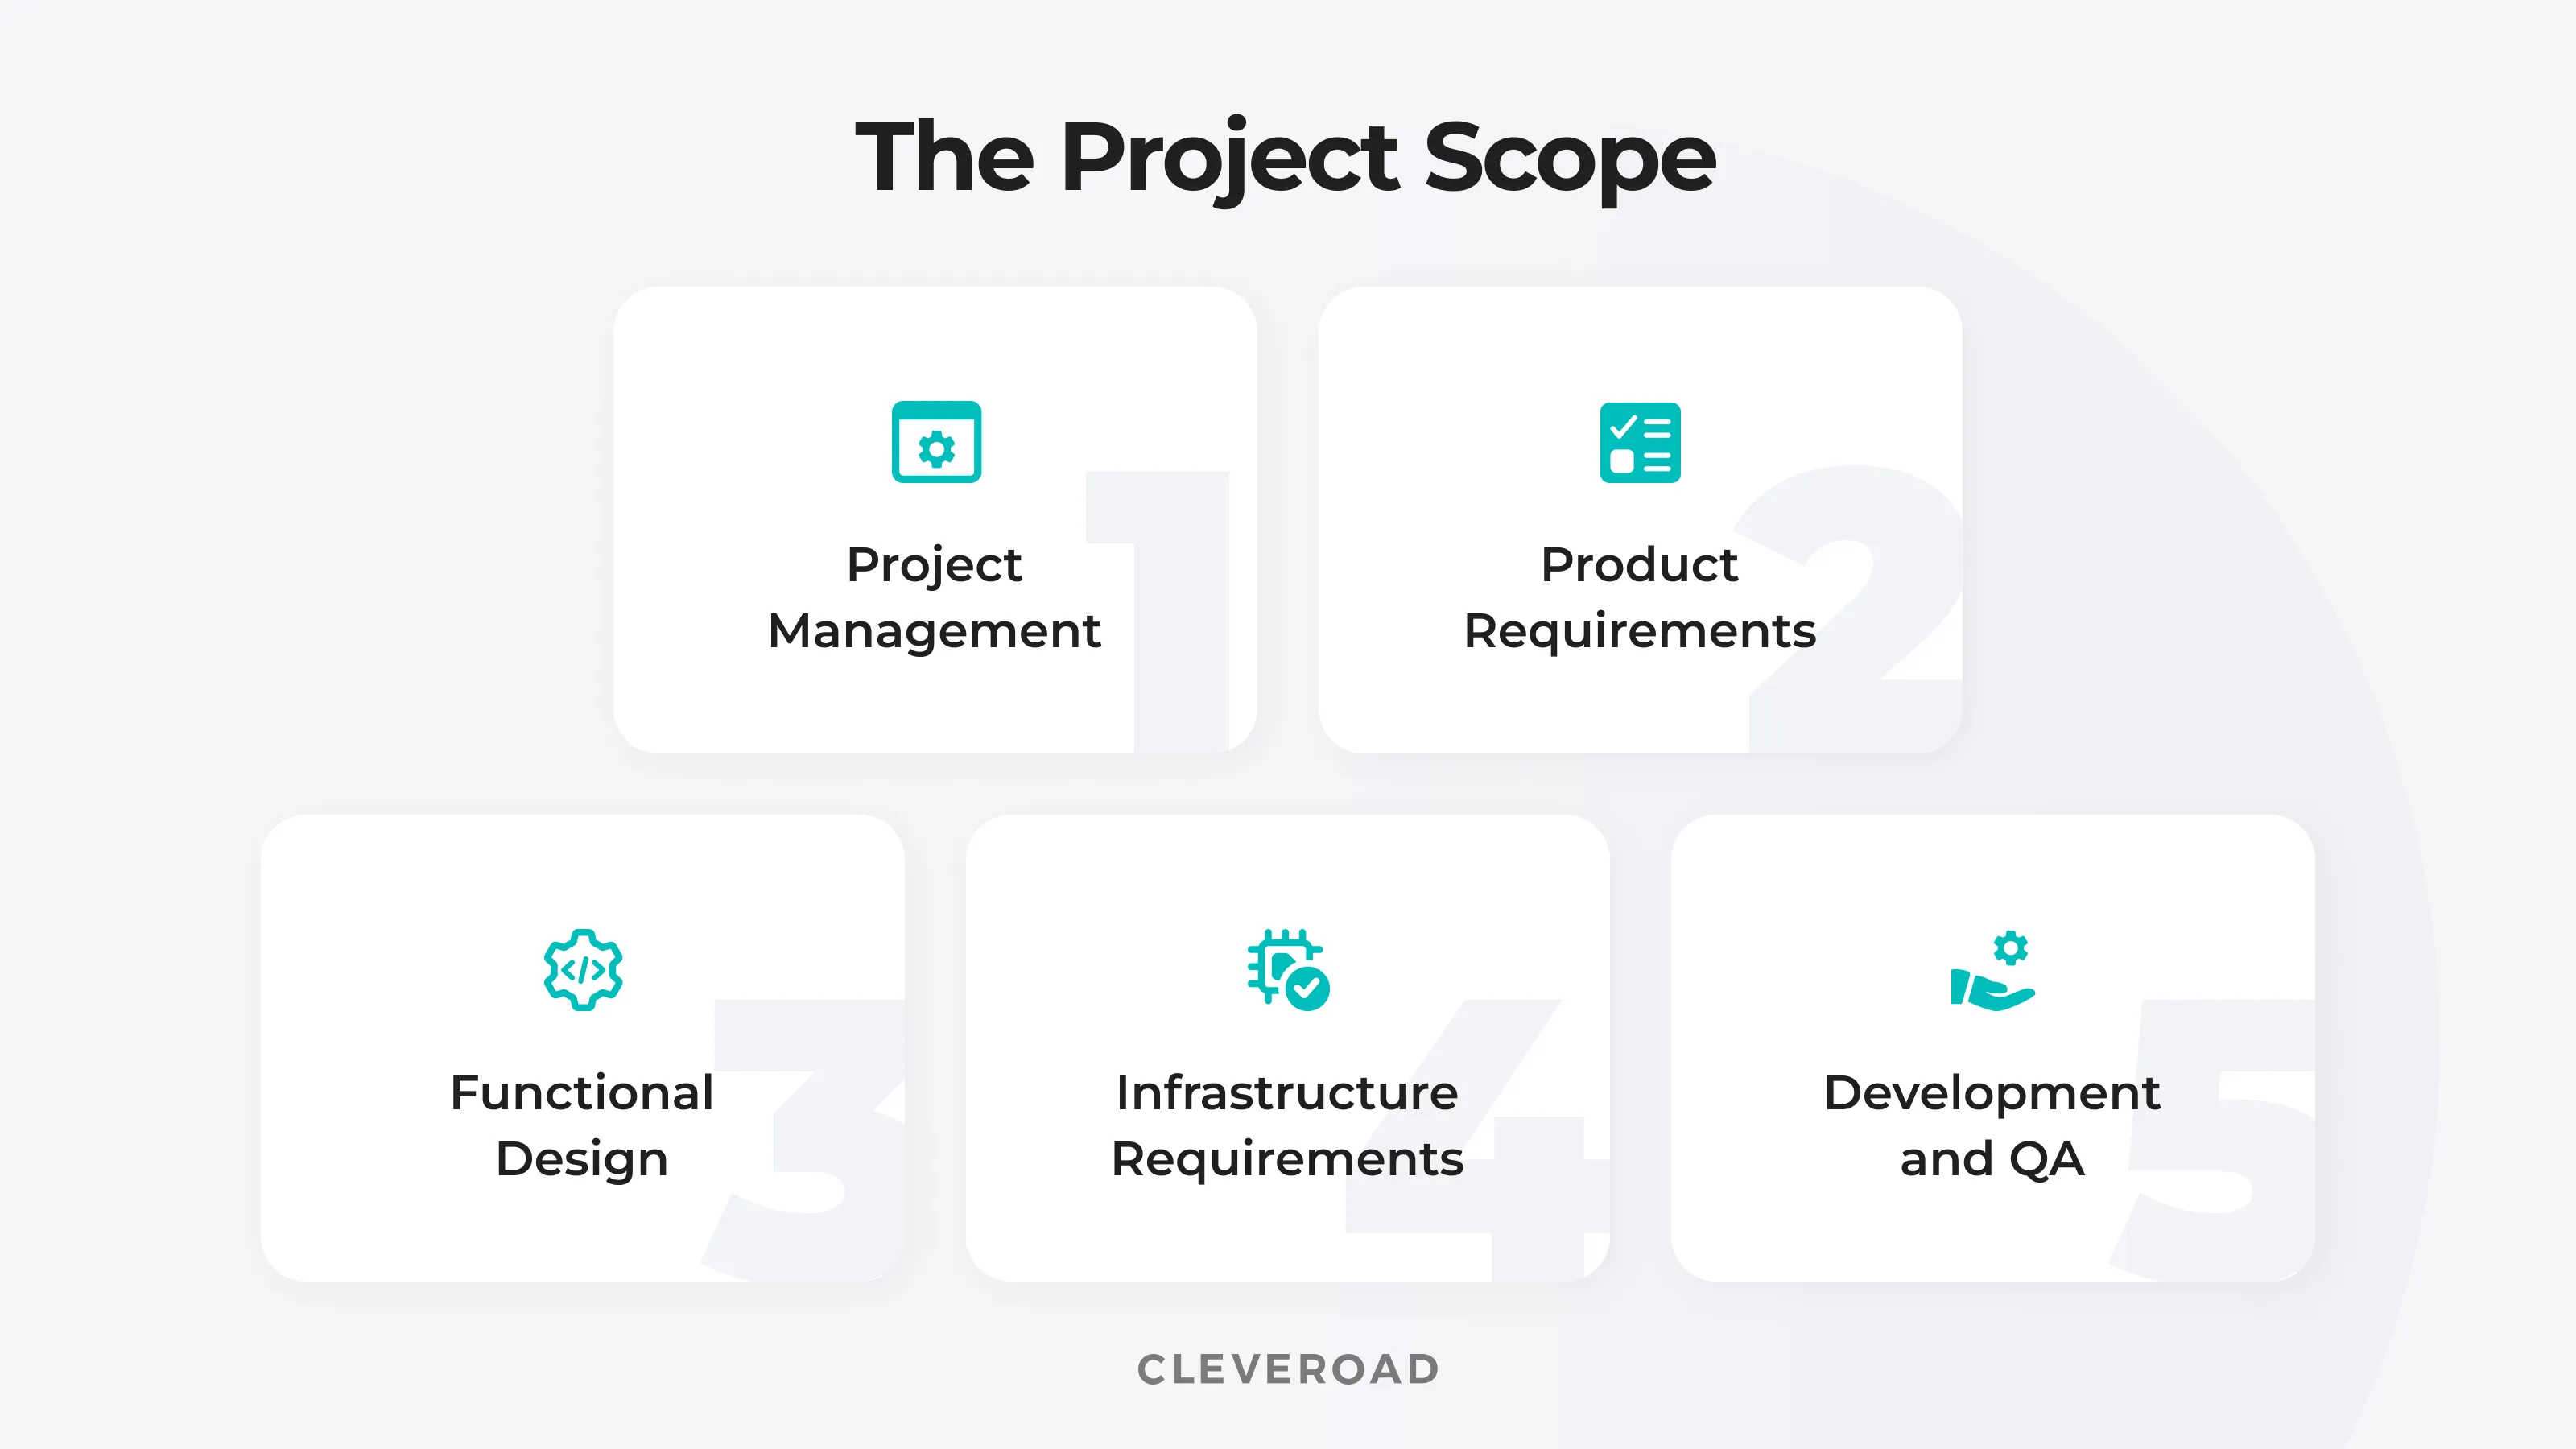 The project scope